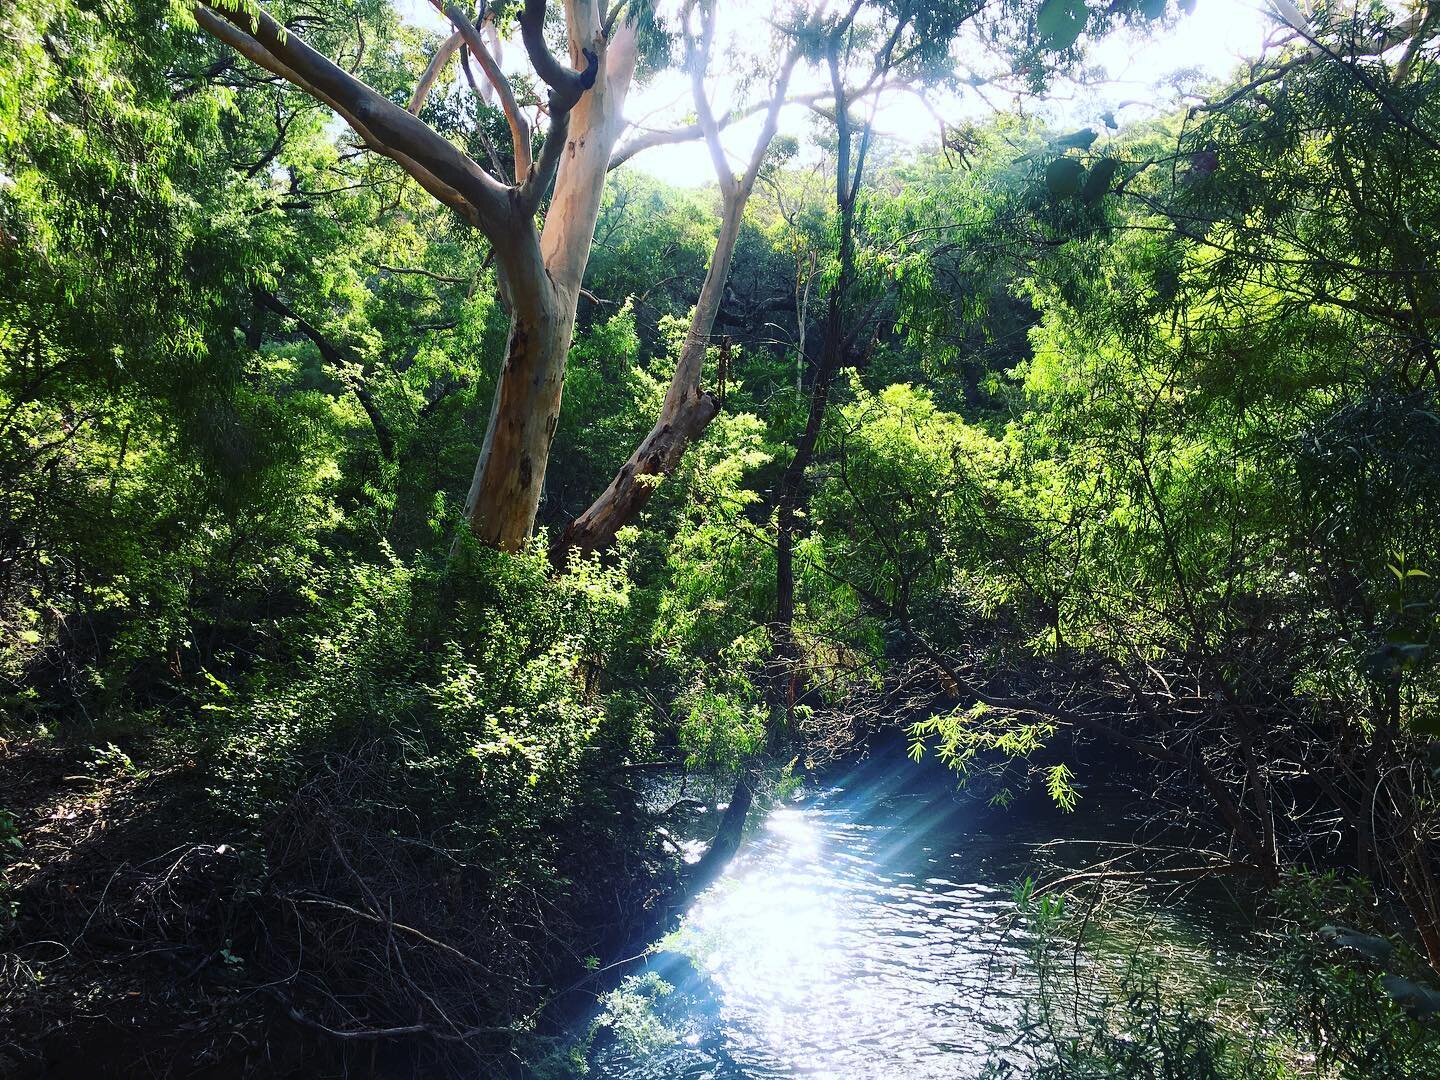 Sunlight on water and the burbling of a stream&hellip; sensory healing in wild places is what we do!
www.joytrails.com.au 
#foresttherapy #natureheals #joyfulliving #shinrinyoku #forestbathing  #foresthealing #river #gracetownsouthwest #cowaramuplife